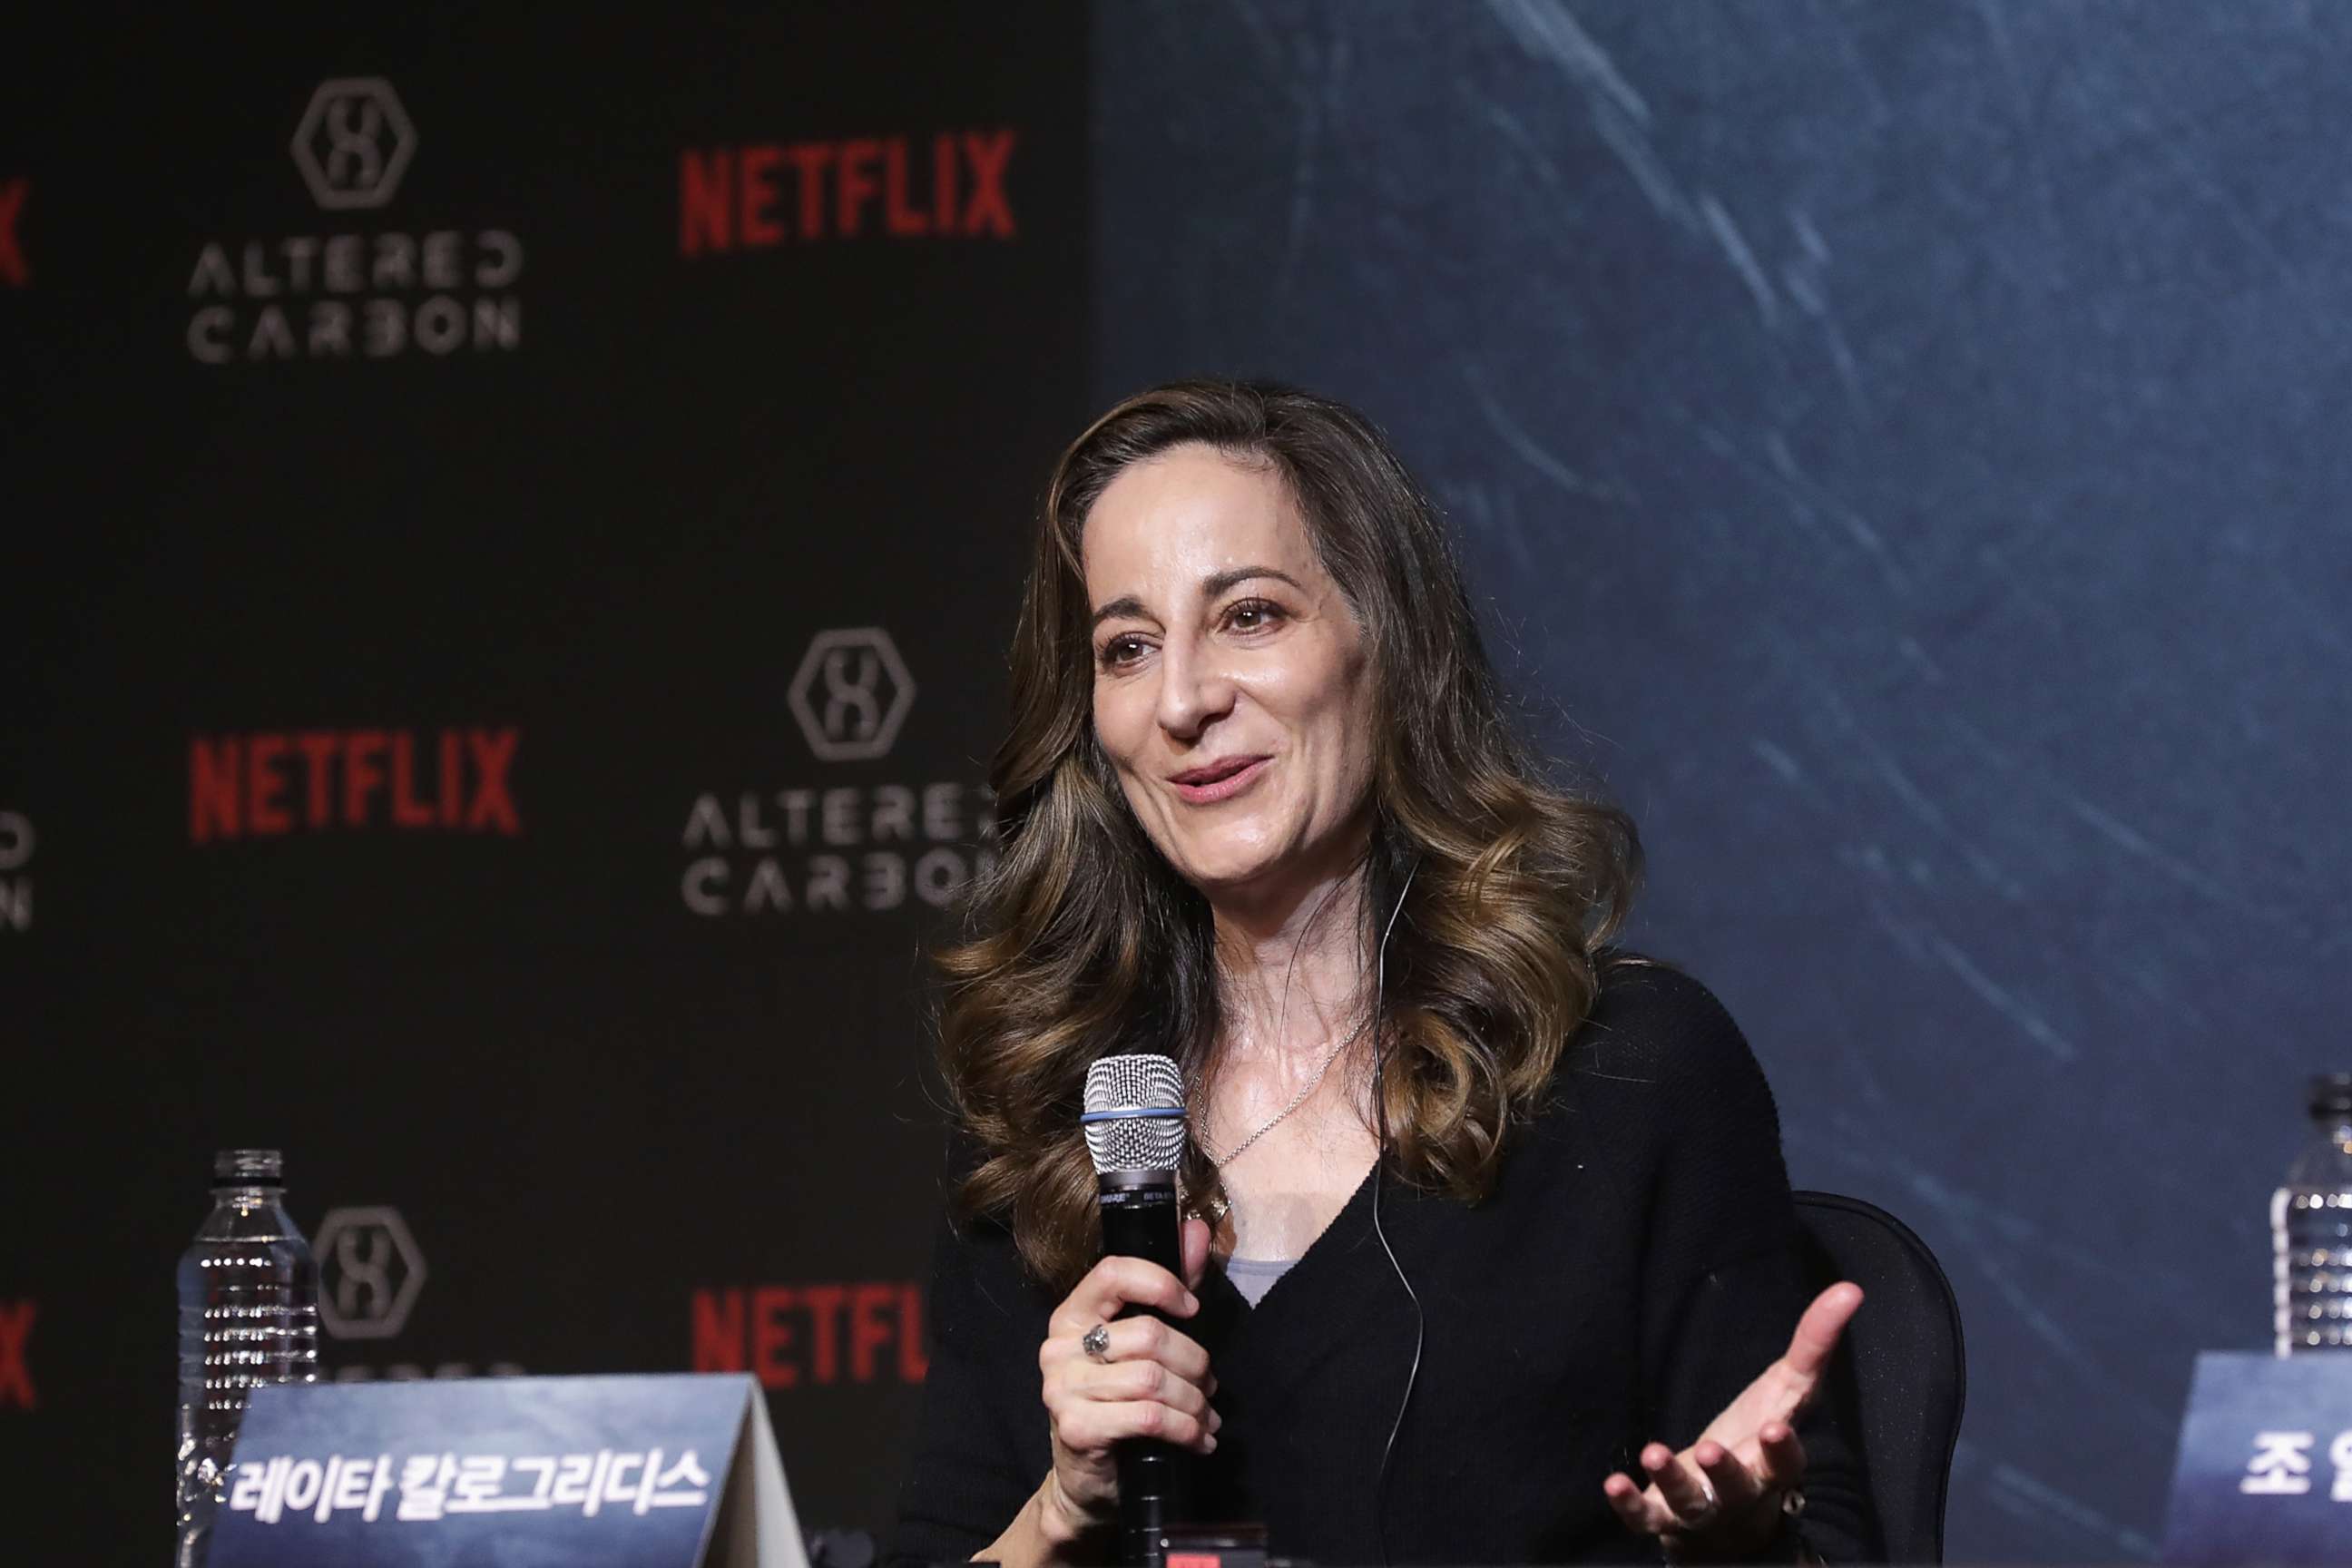 PHOTO: Screenwriter Laeta Kalogridis attends the press conference for Netflix's "Altered Carbon" on Jan. 22, 2018 in Seoul.